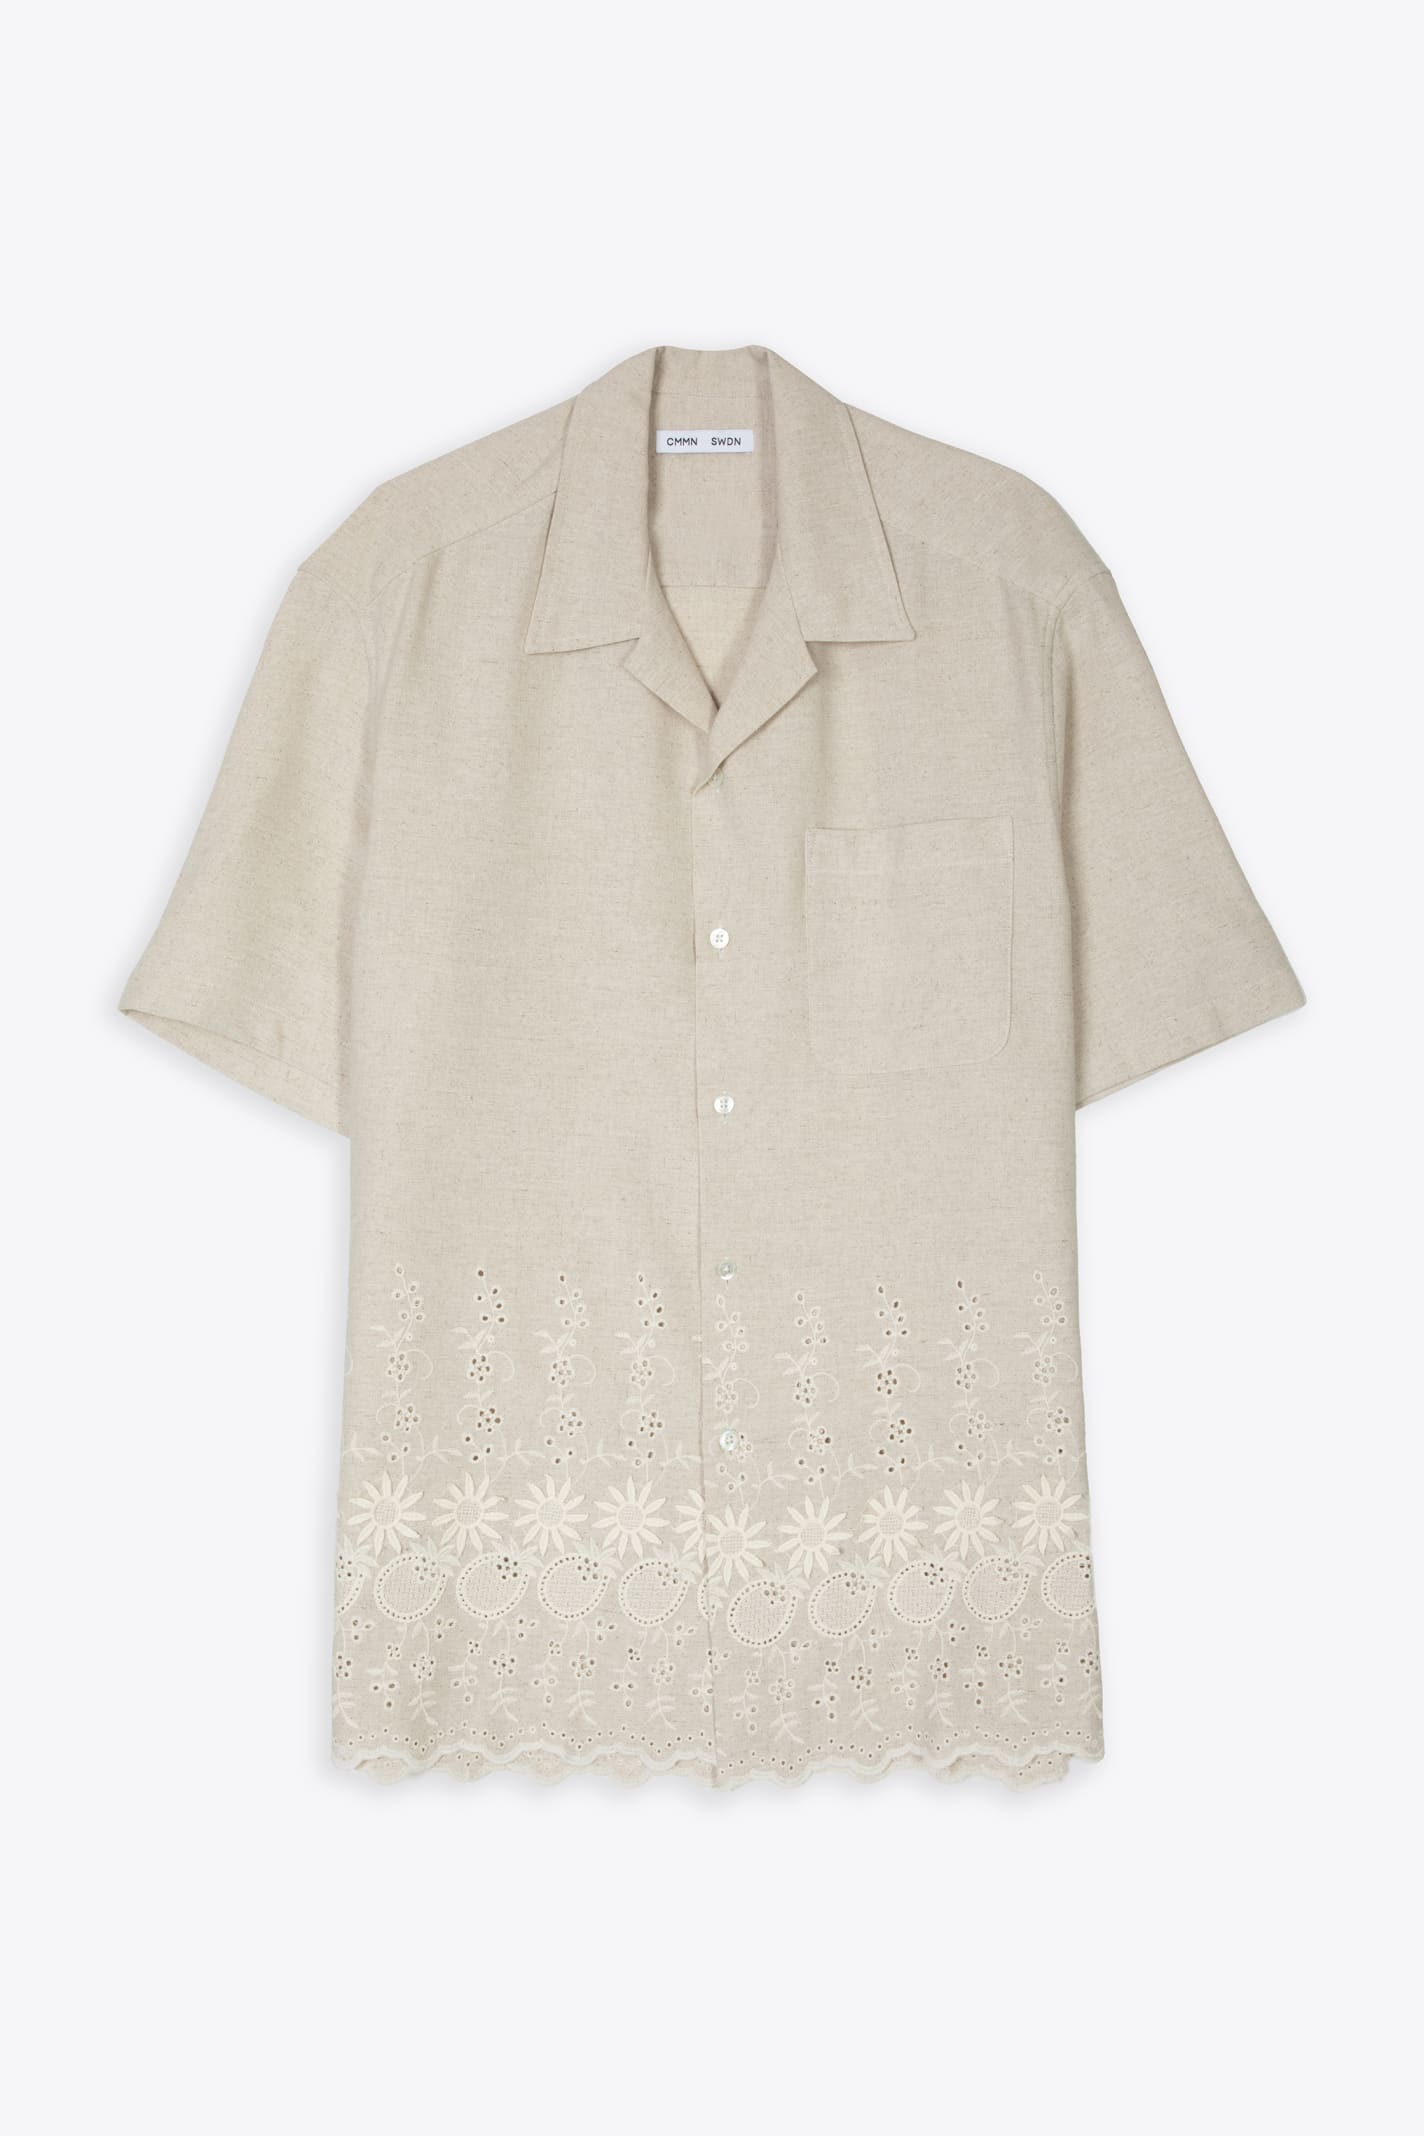 CMMN SWDN EMBROIDERED SHORT SLEEVE CAMP COLLAR SHIRT BEIGE LINEN BLEND SHIRT WITH BRODERIE ANGLAISE - TURE EMB